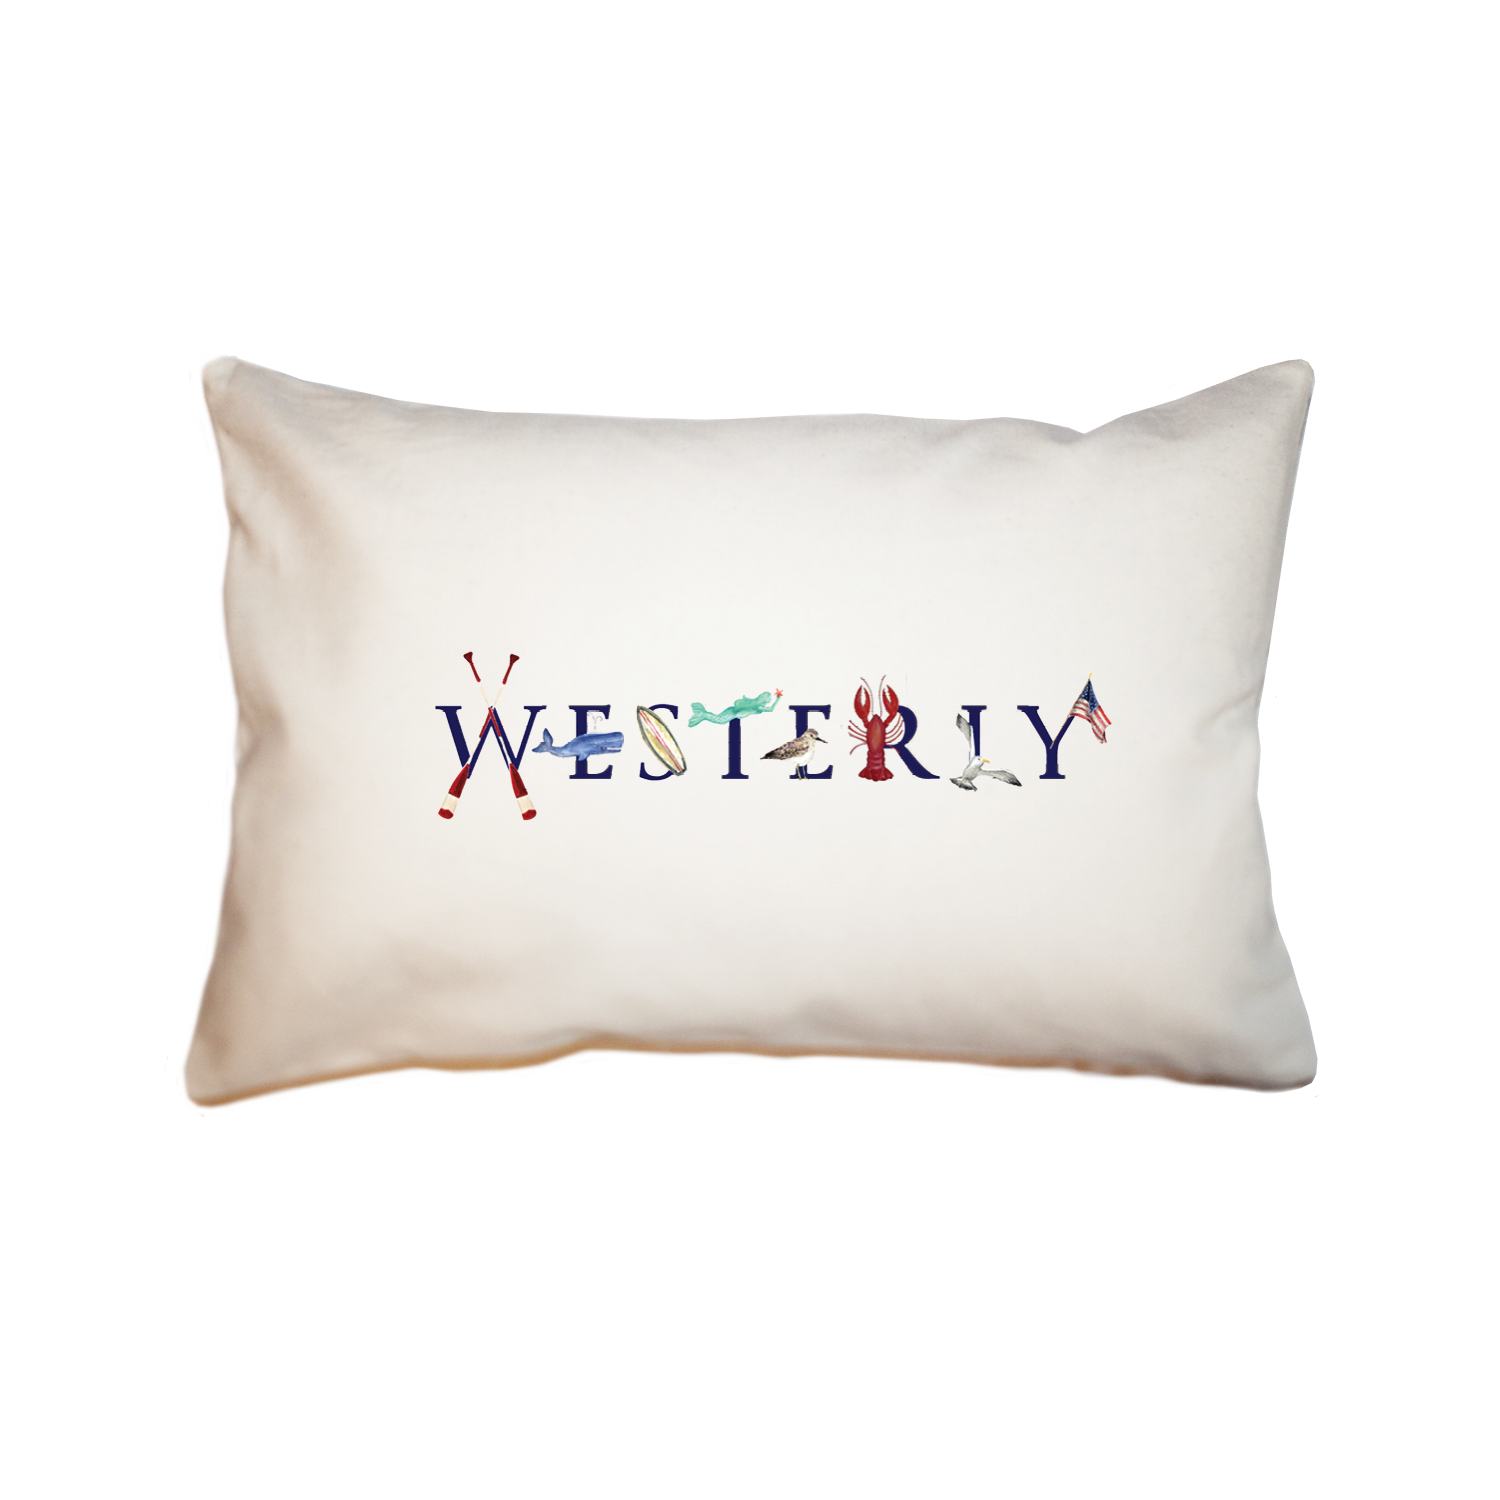 Westerly large rectangle pillow